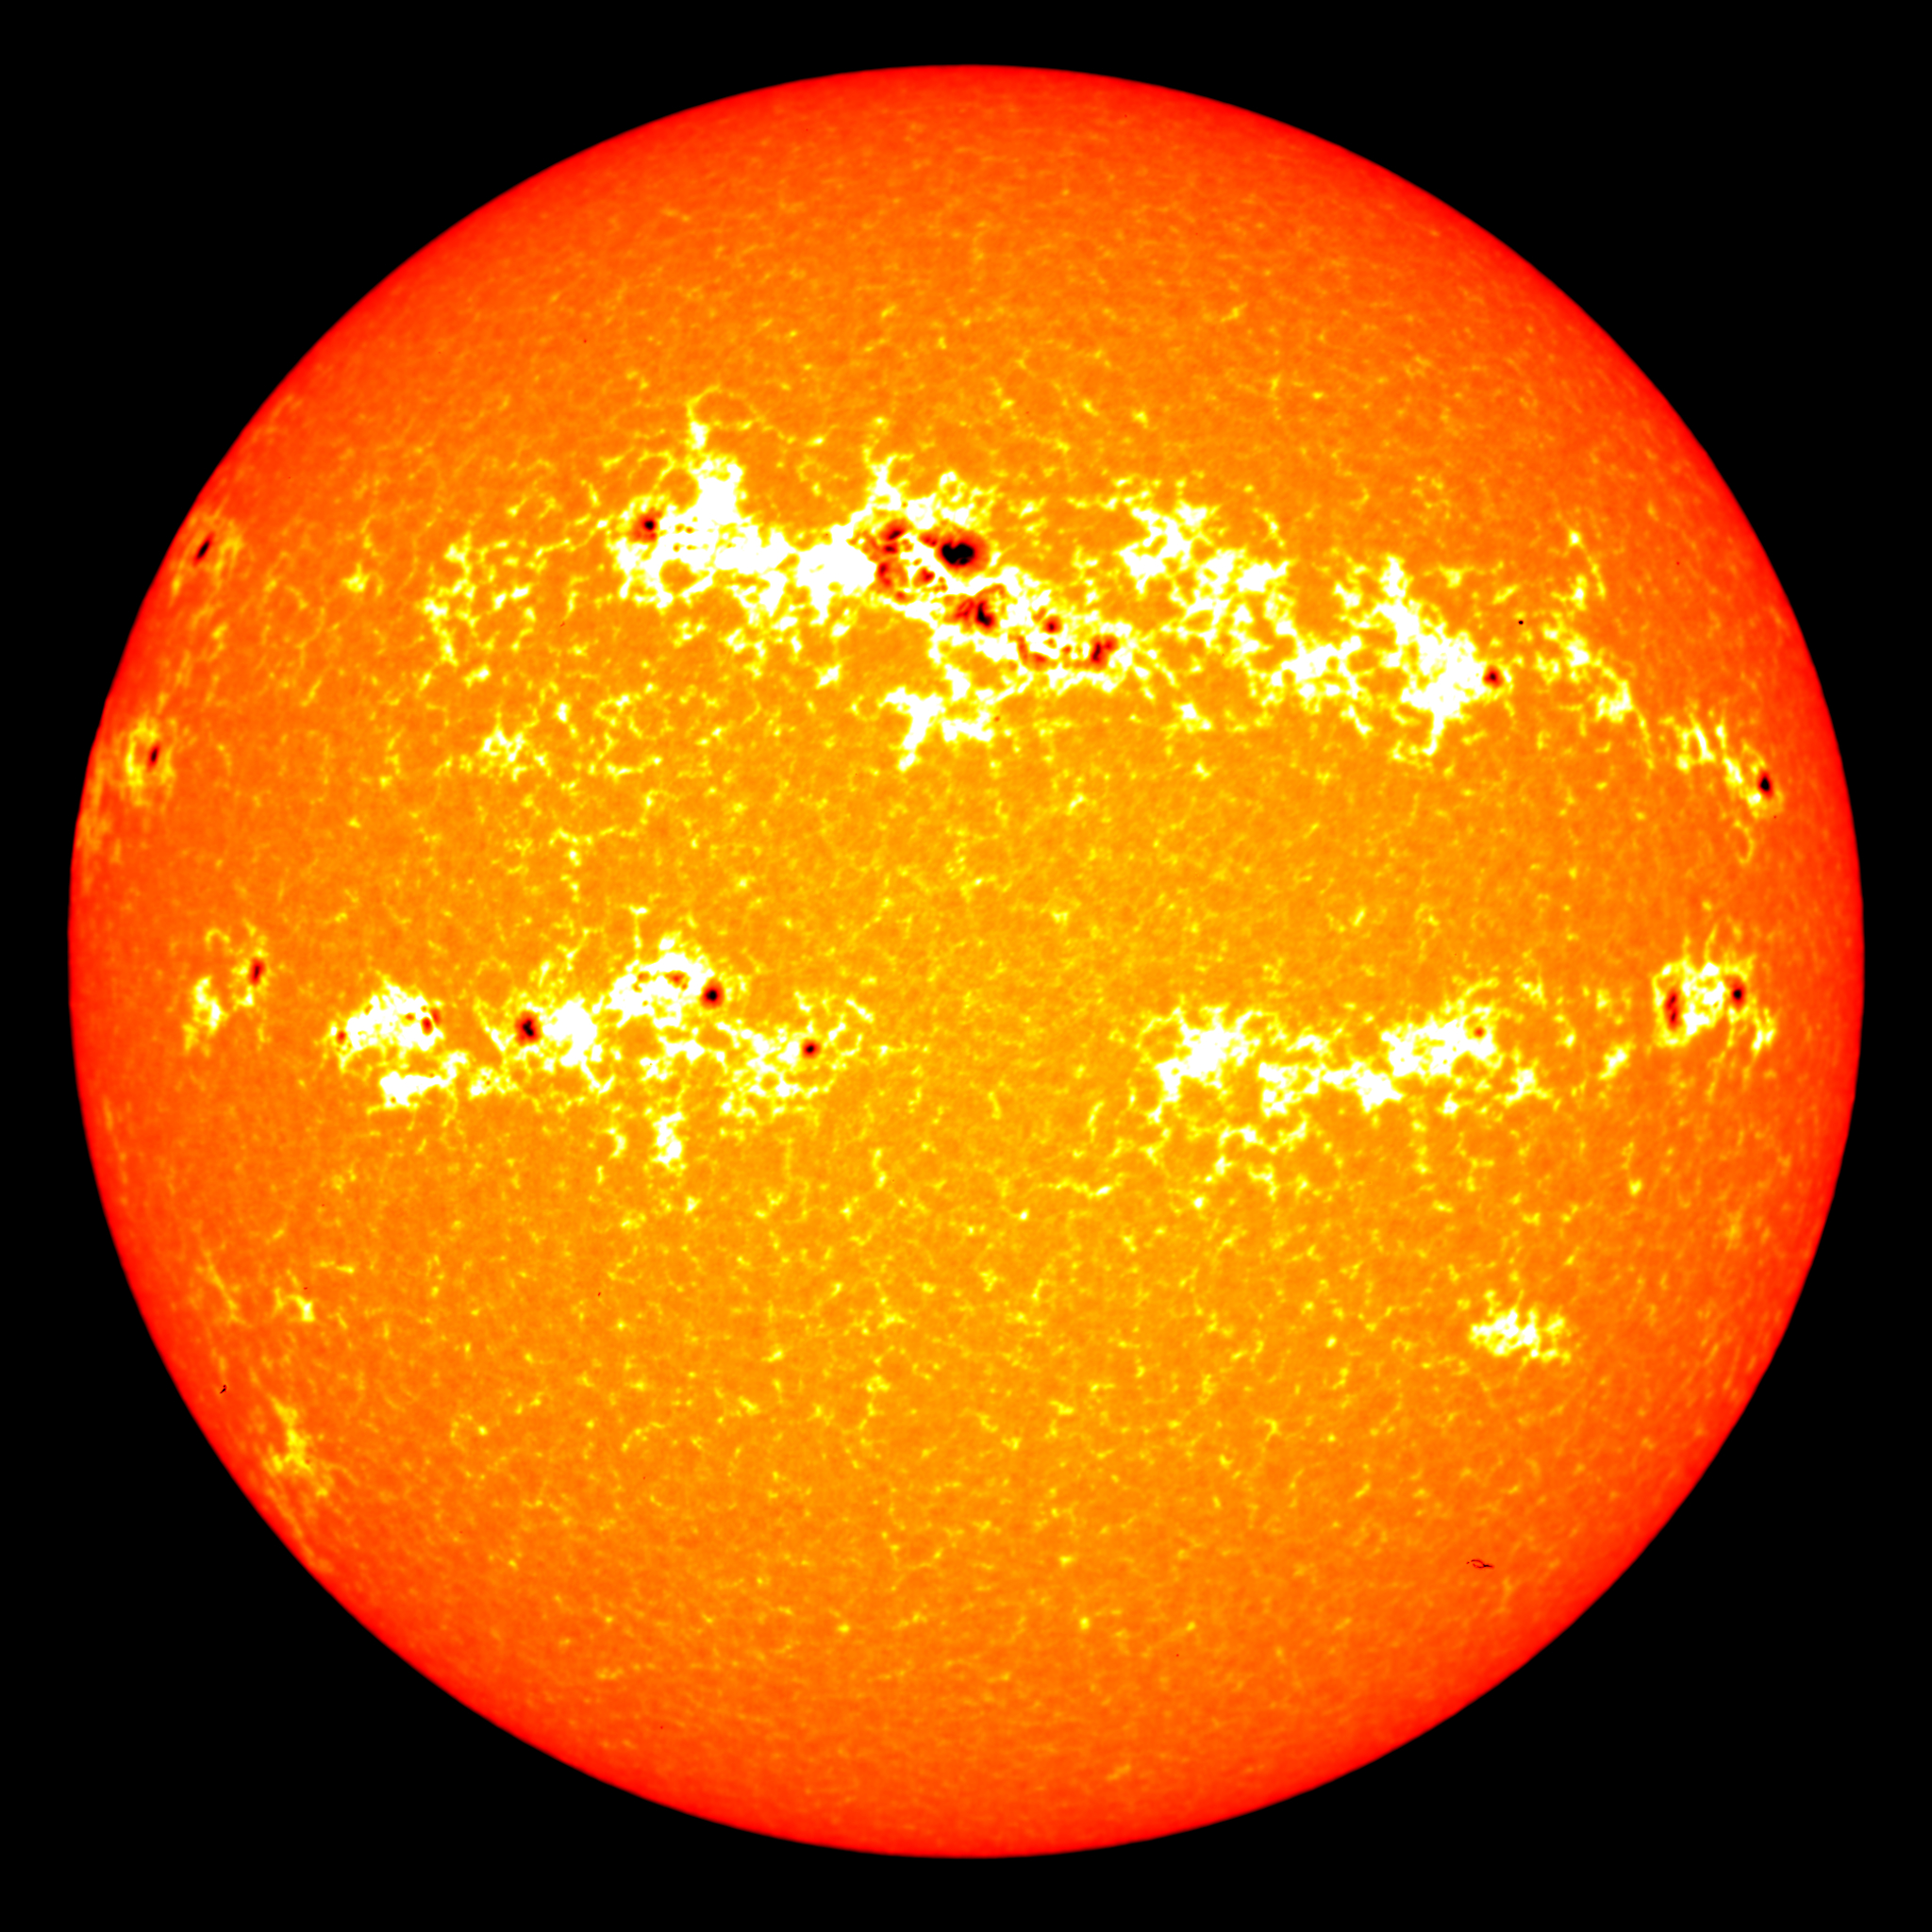 Dark sunspots and bright areas around them called faculae, visible in this 2001 solar image, cause most of the variation in total solar irradiance. Credit: NASA/GSFC/SVS